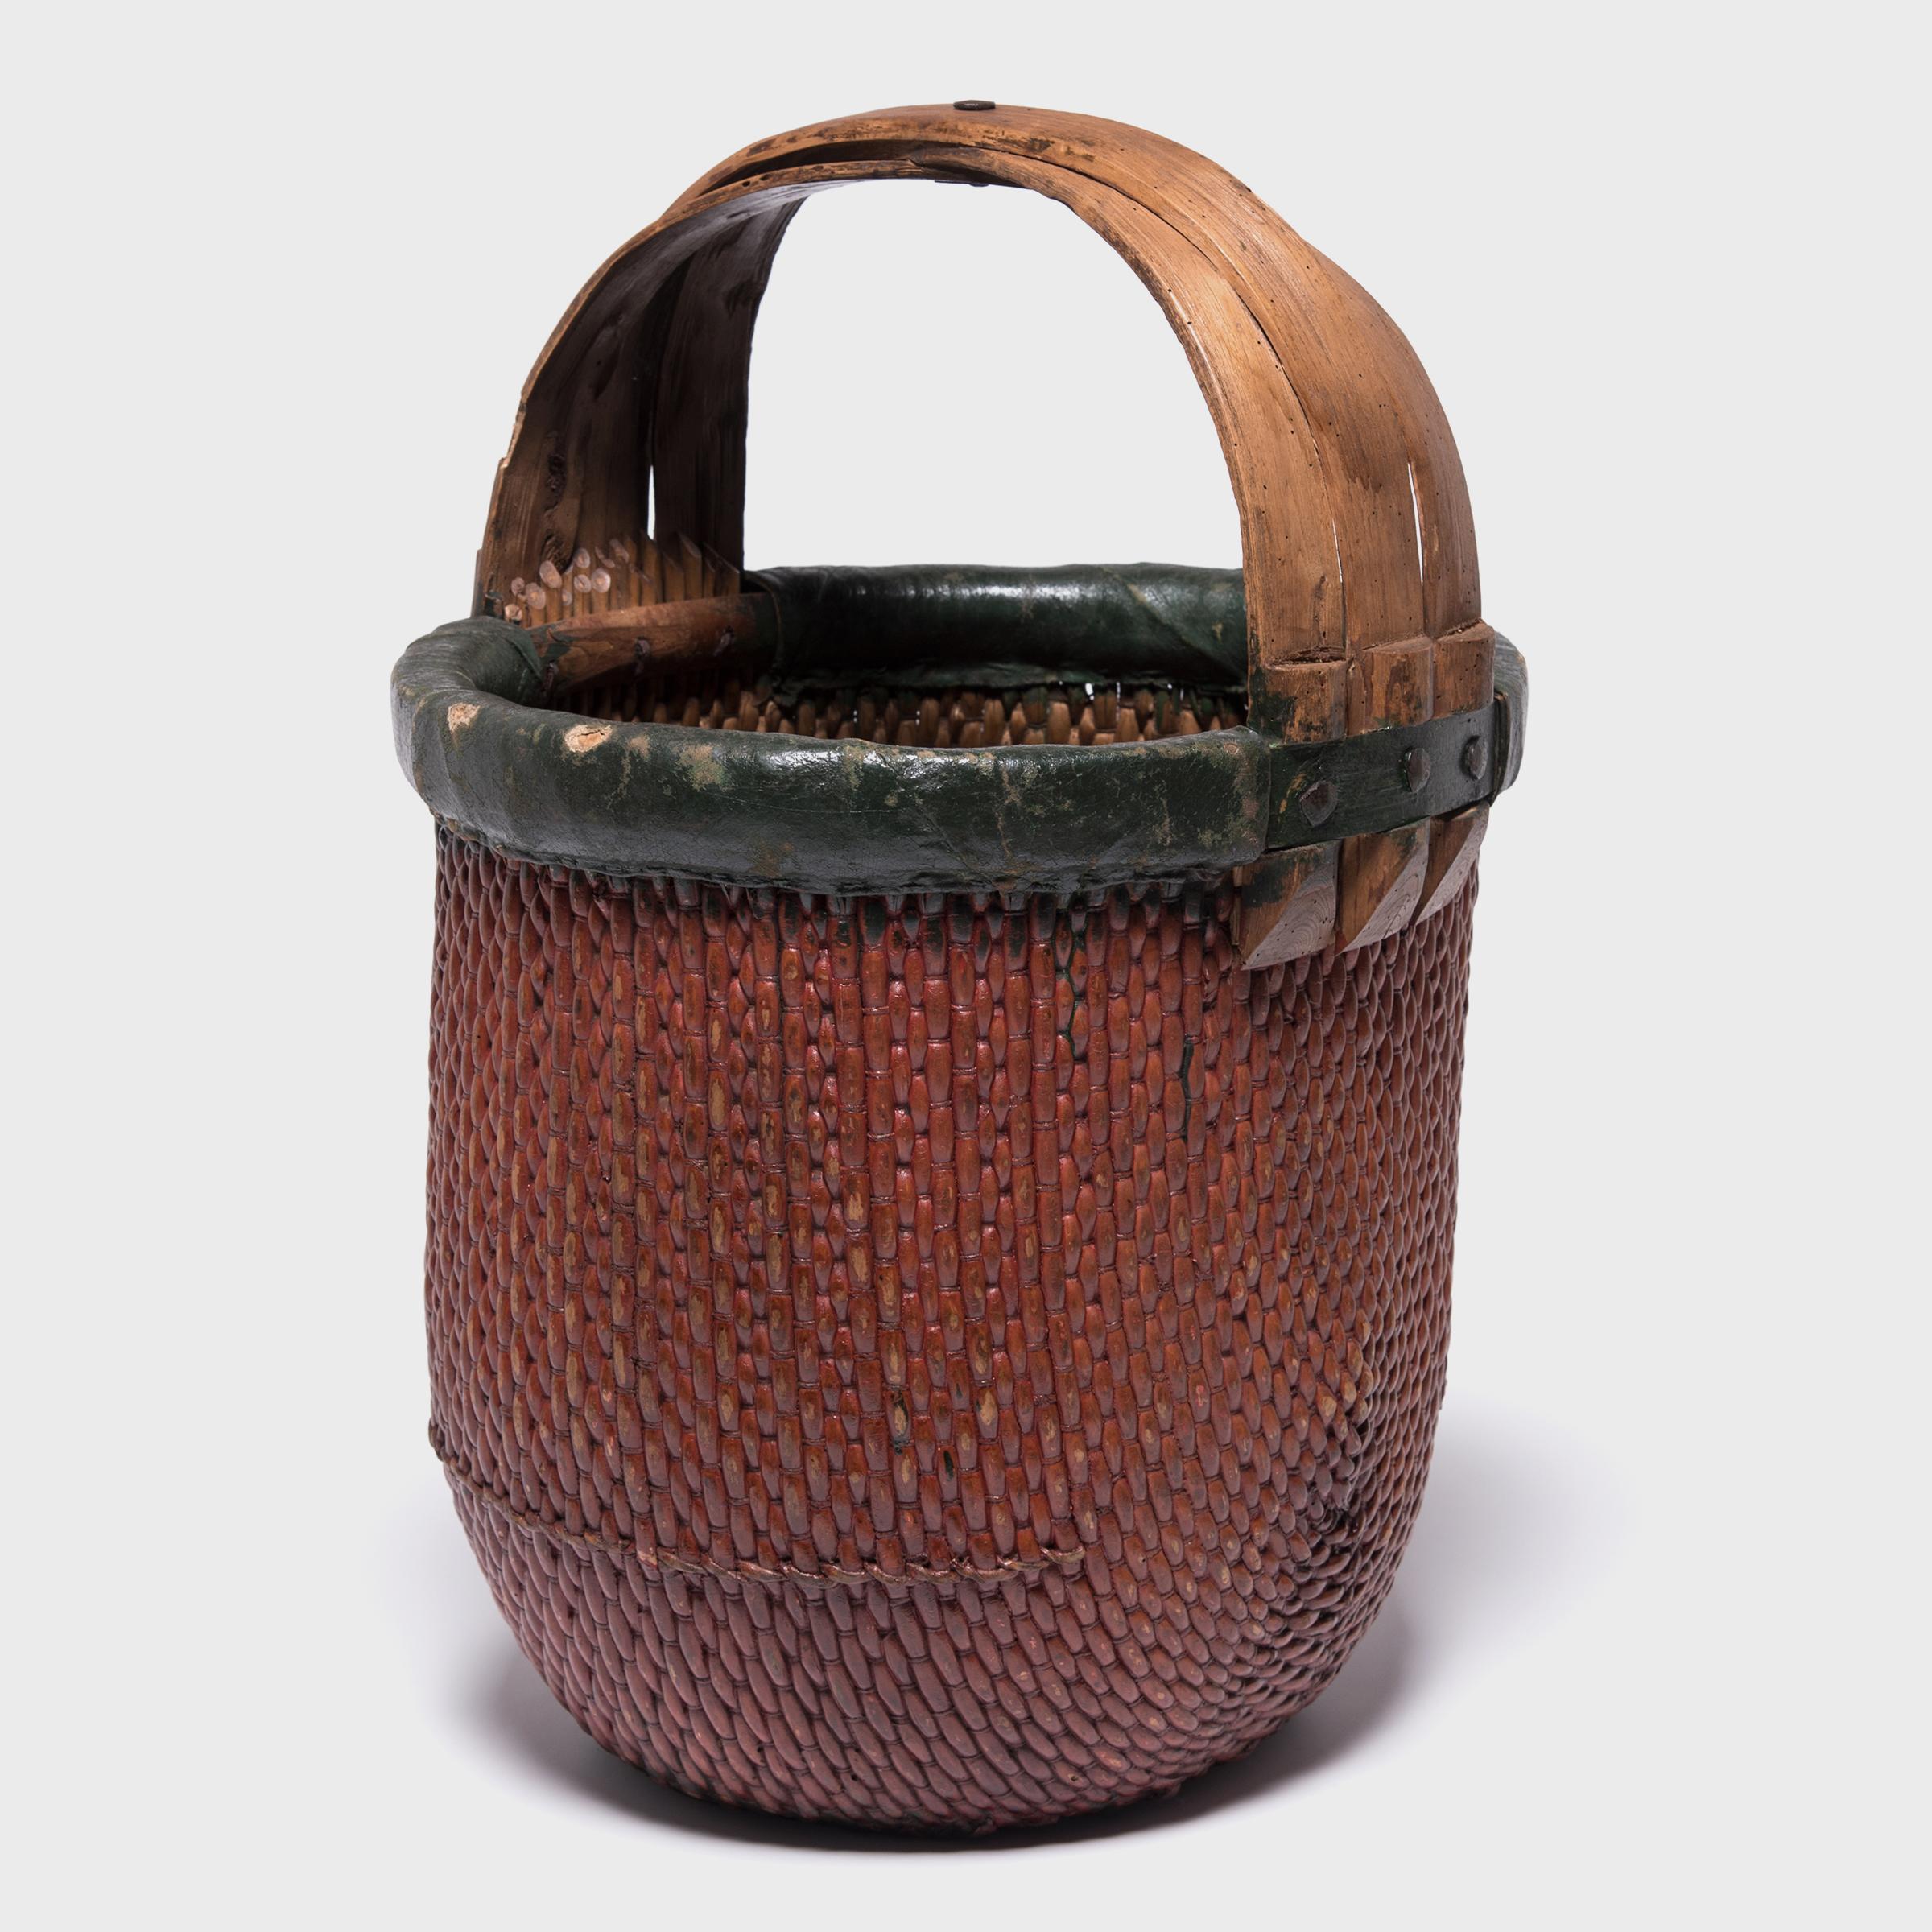 Rustic Chinese Red Lacquer Fisherman's Basket, c. 1900